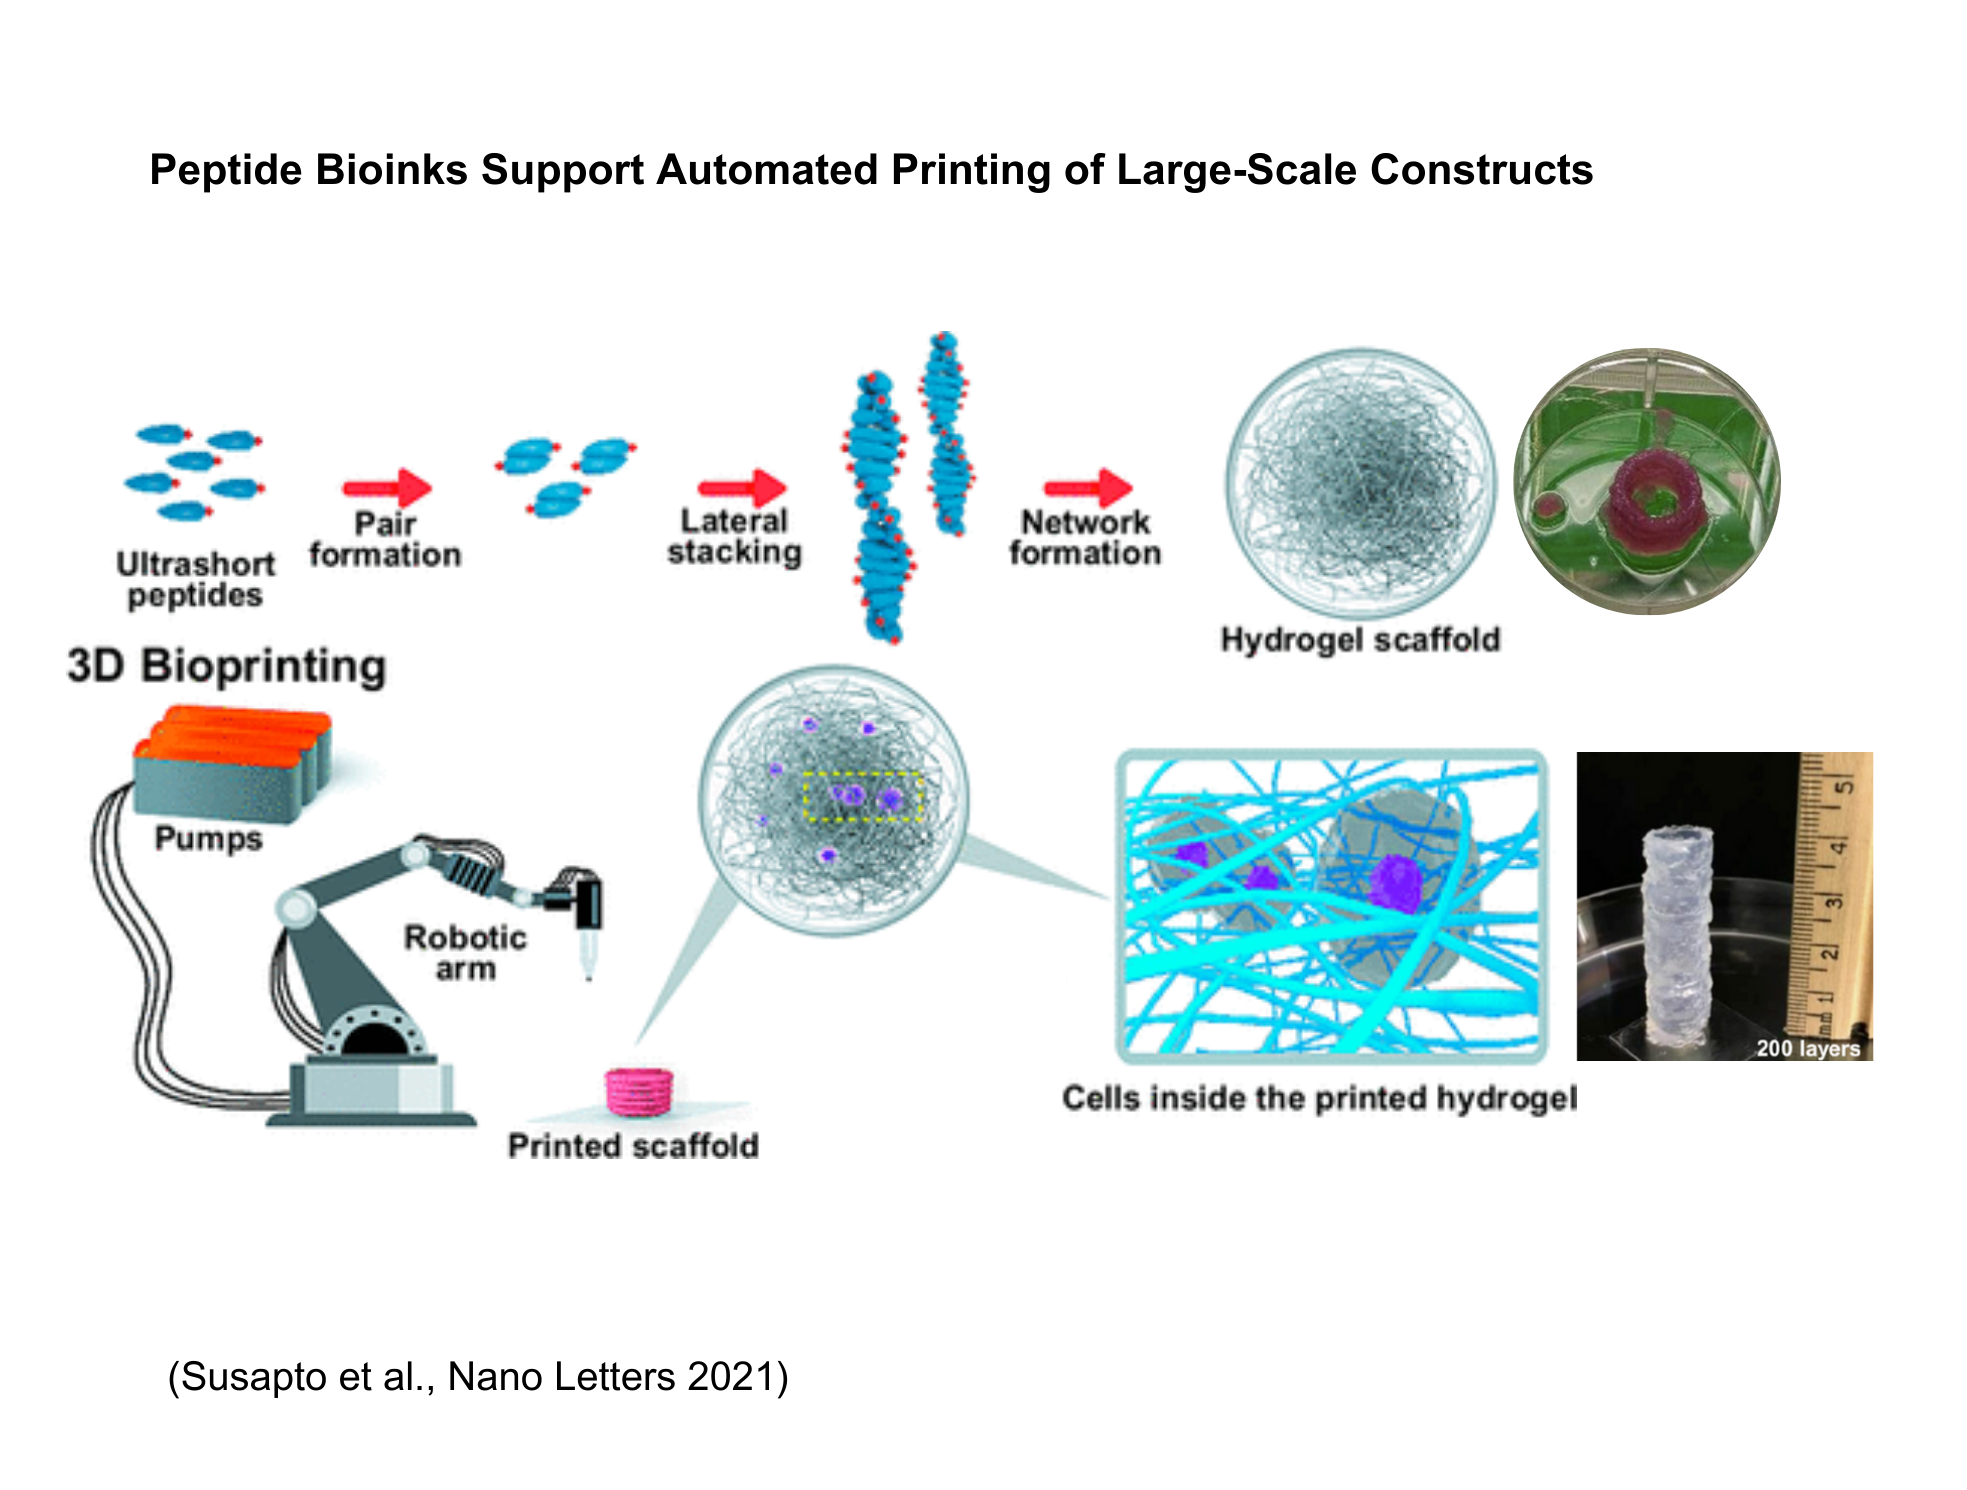 Peptide Bioinks Support Automated Printing of Large-Scale Constructs